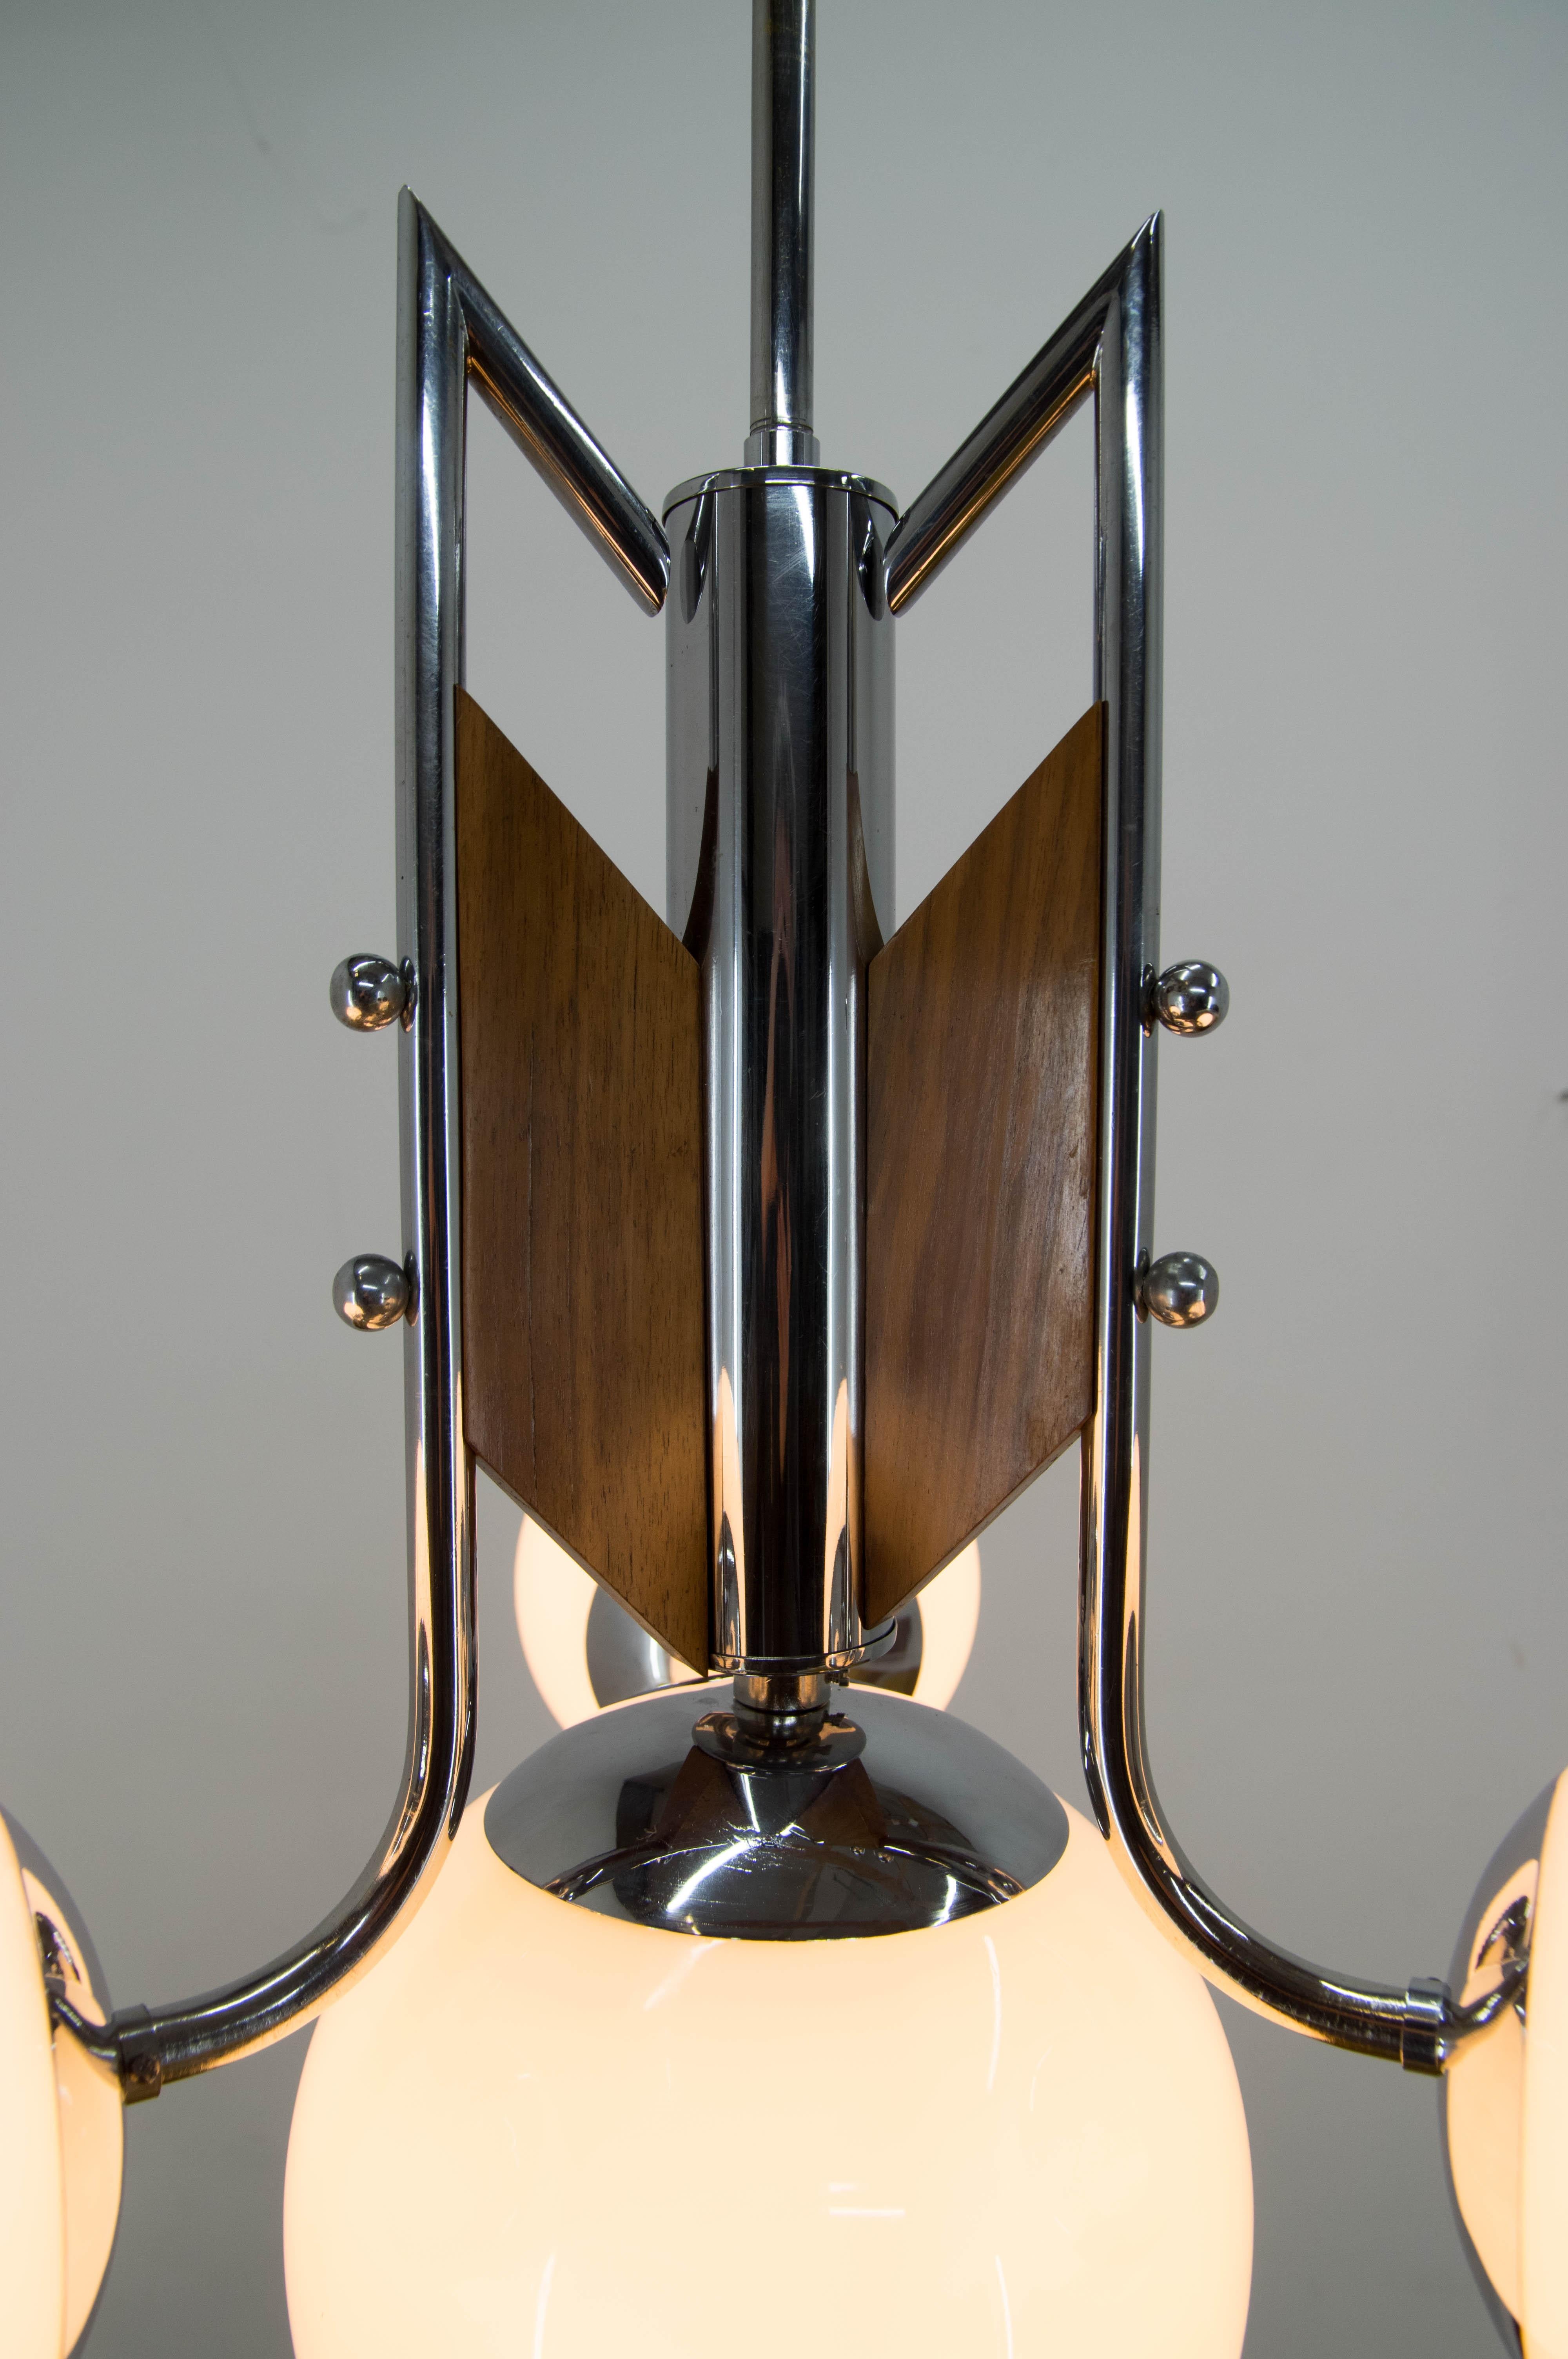 Czech Wood and Chrome Functionalist Chandelier, 1940s For Sale